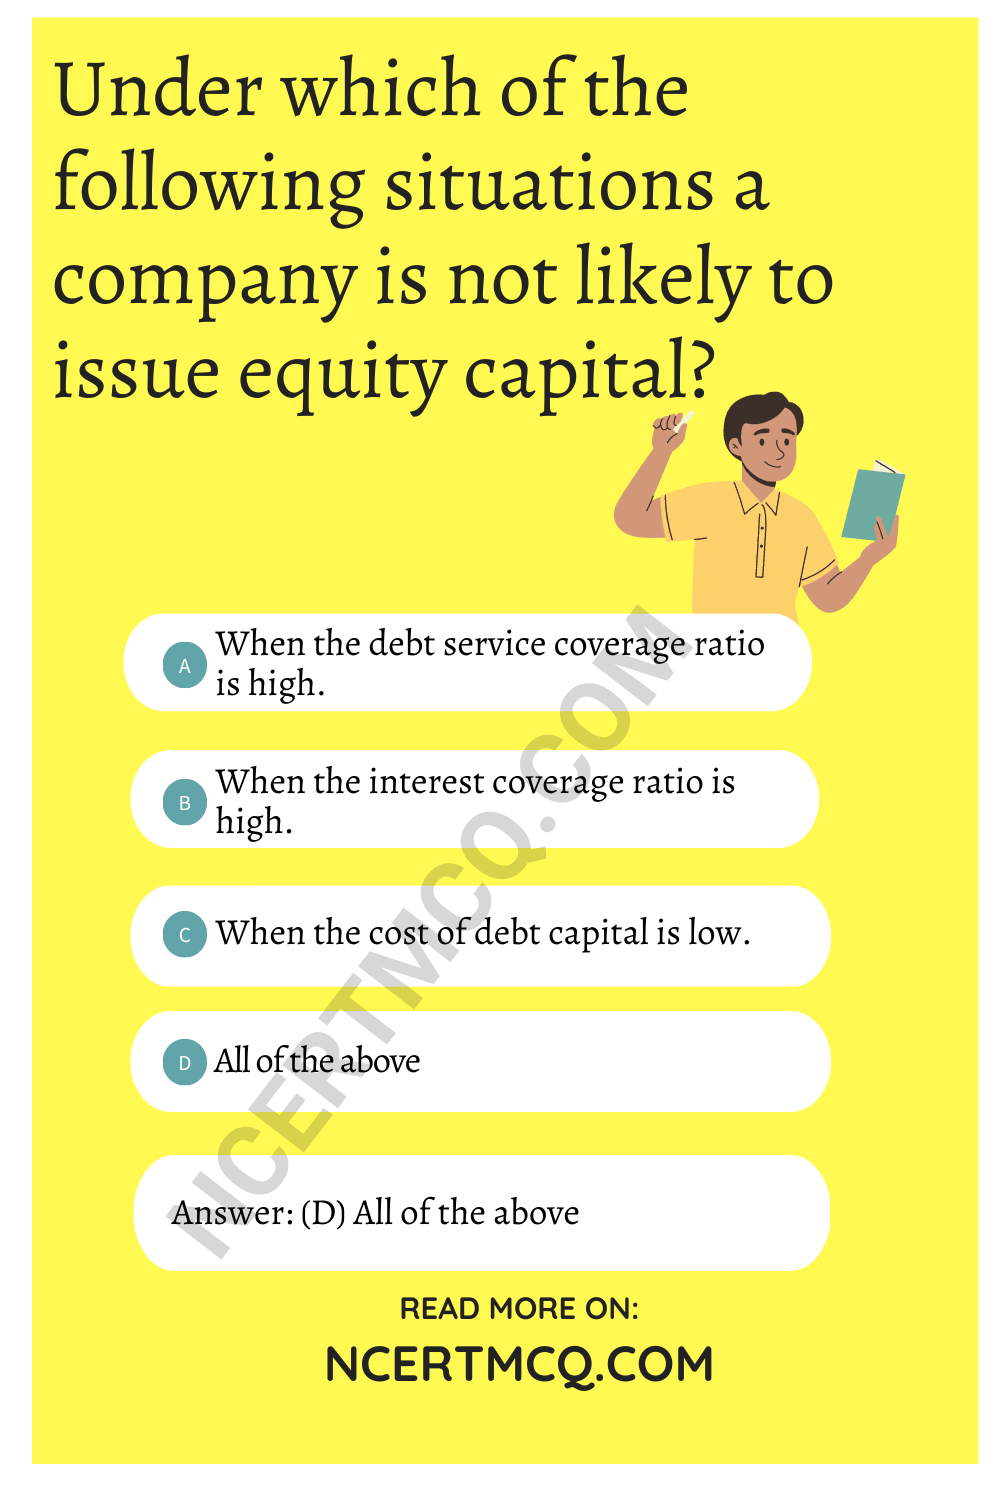 Under which of the following situations a company is not likely to issue equity capital?